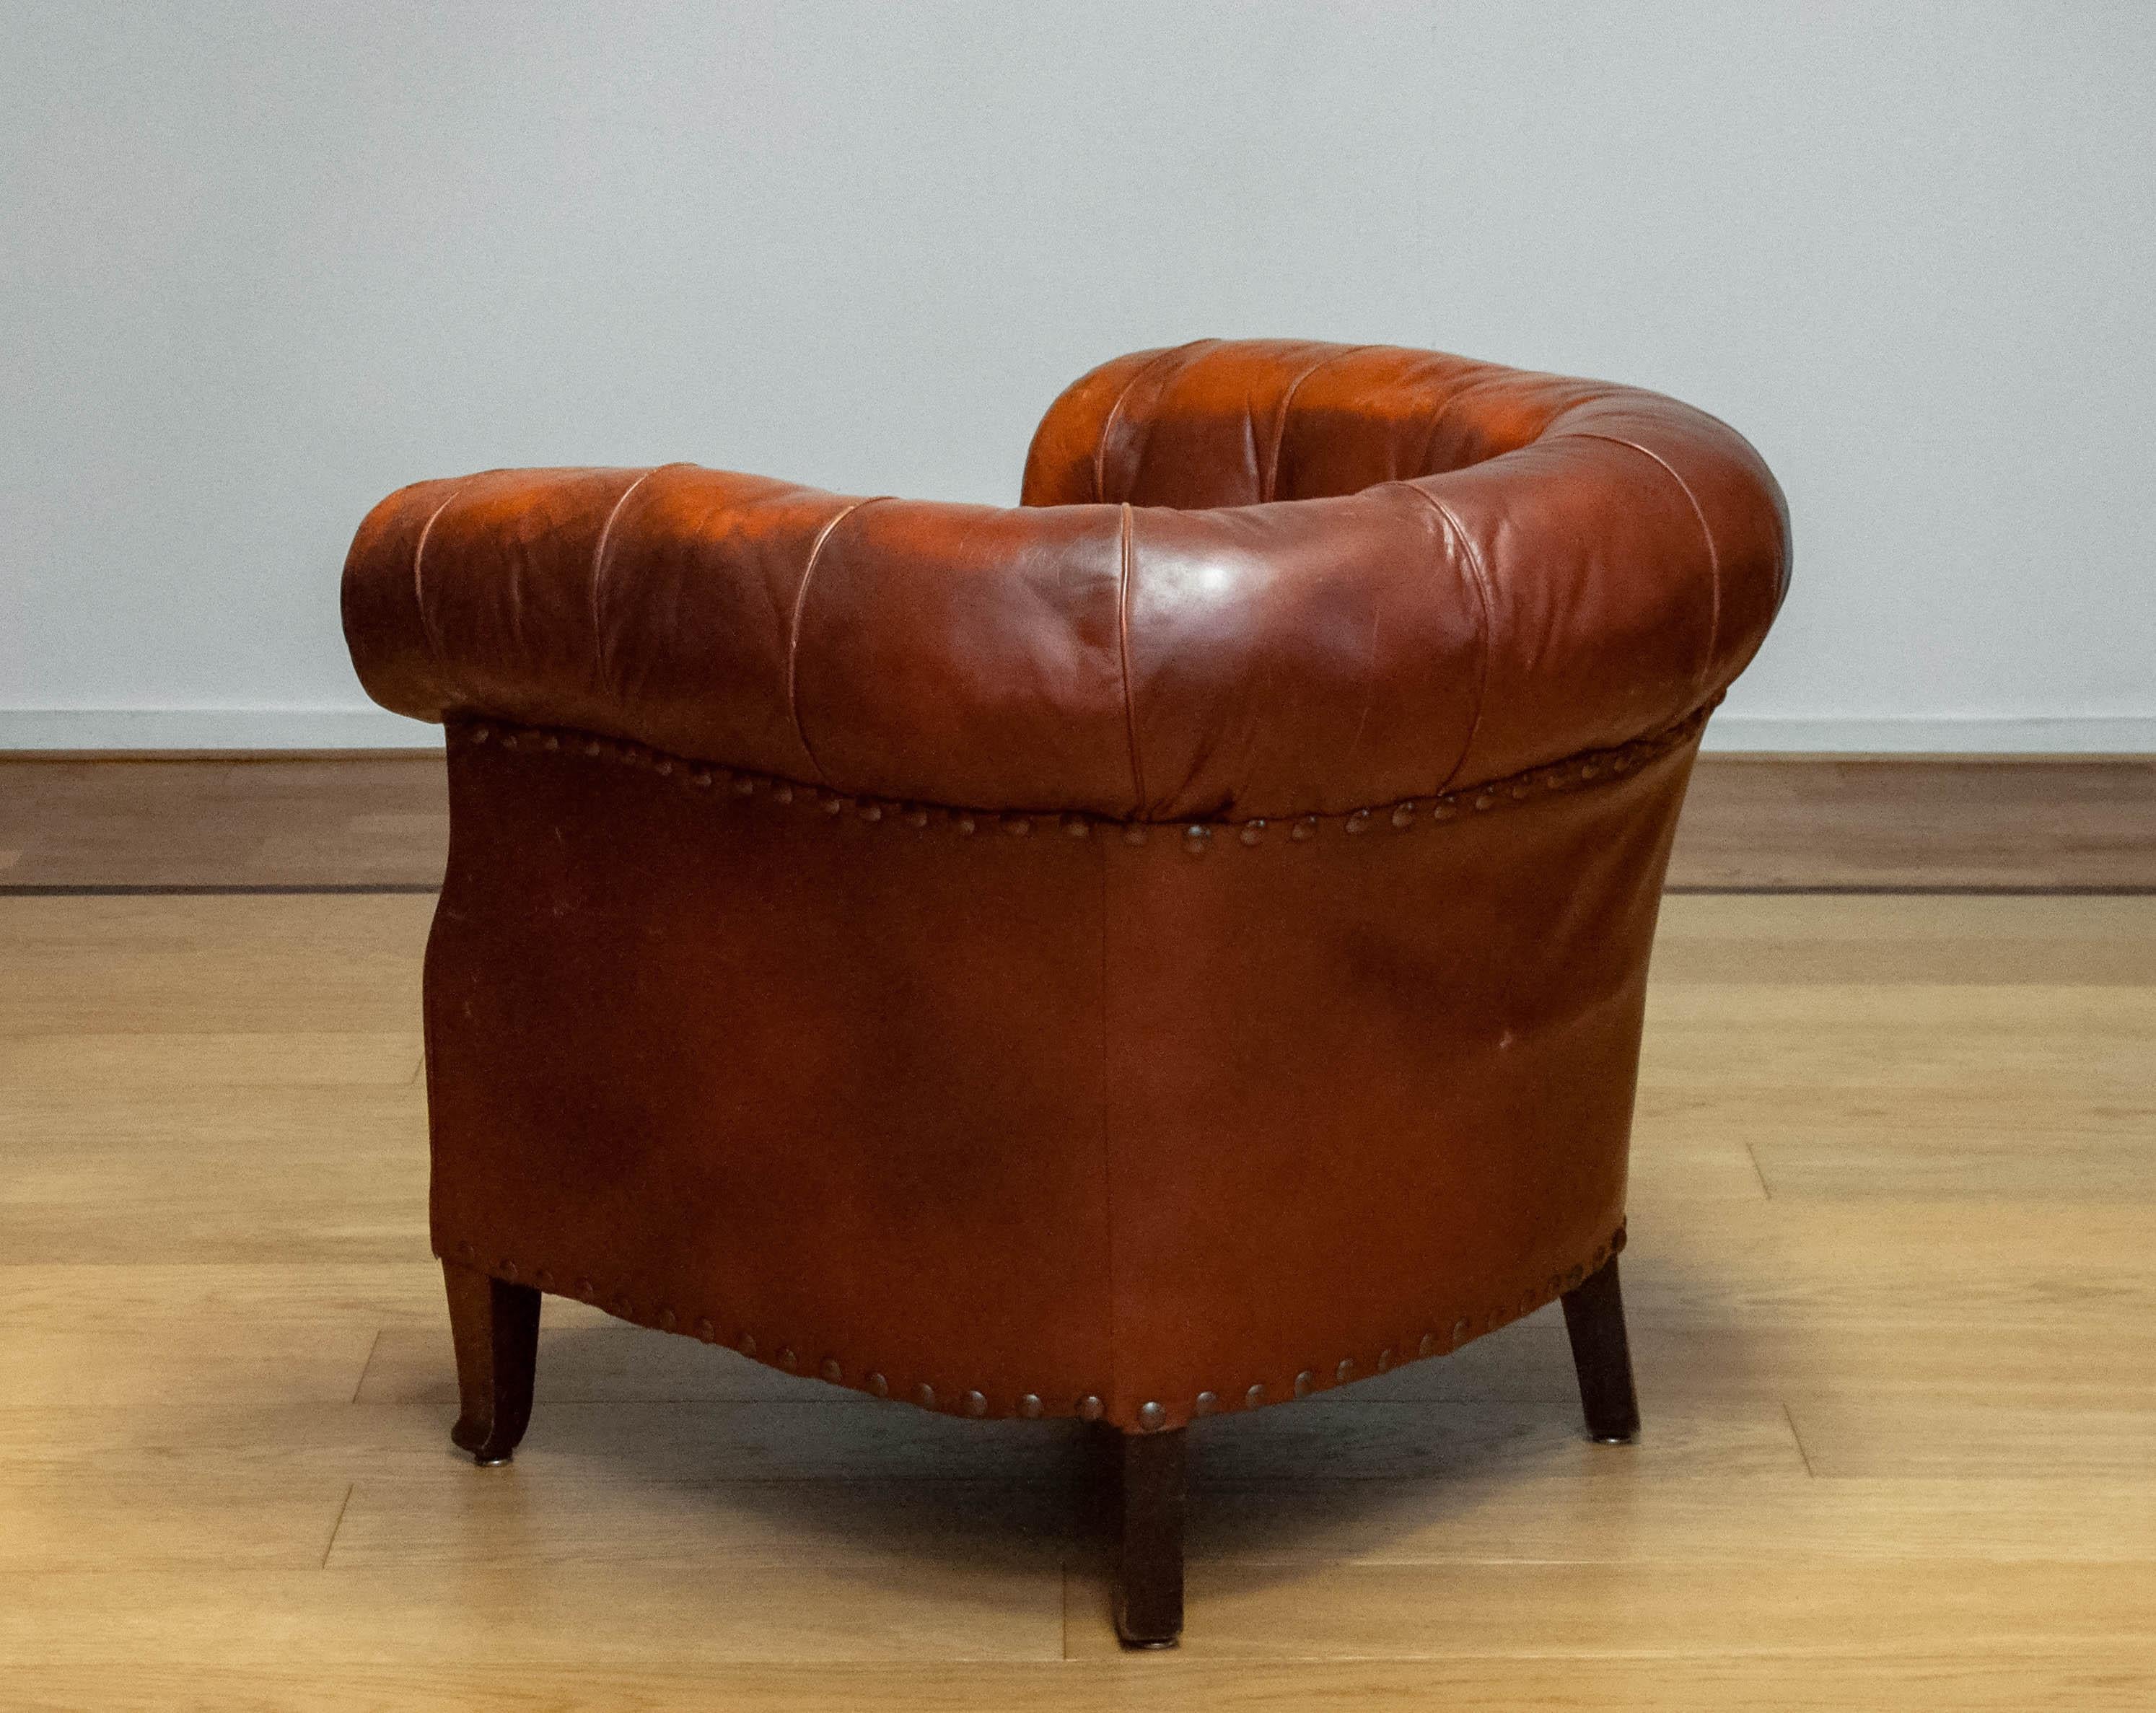 1940s Swedish Tufted Club Chair 'Chesterfield Model' In Tan Brown Worn Leather 5